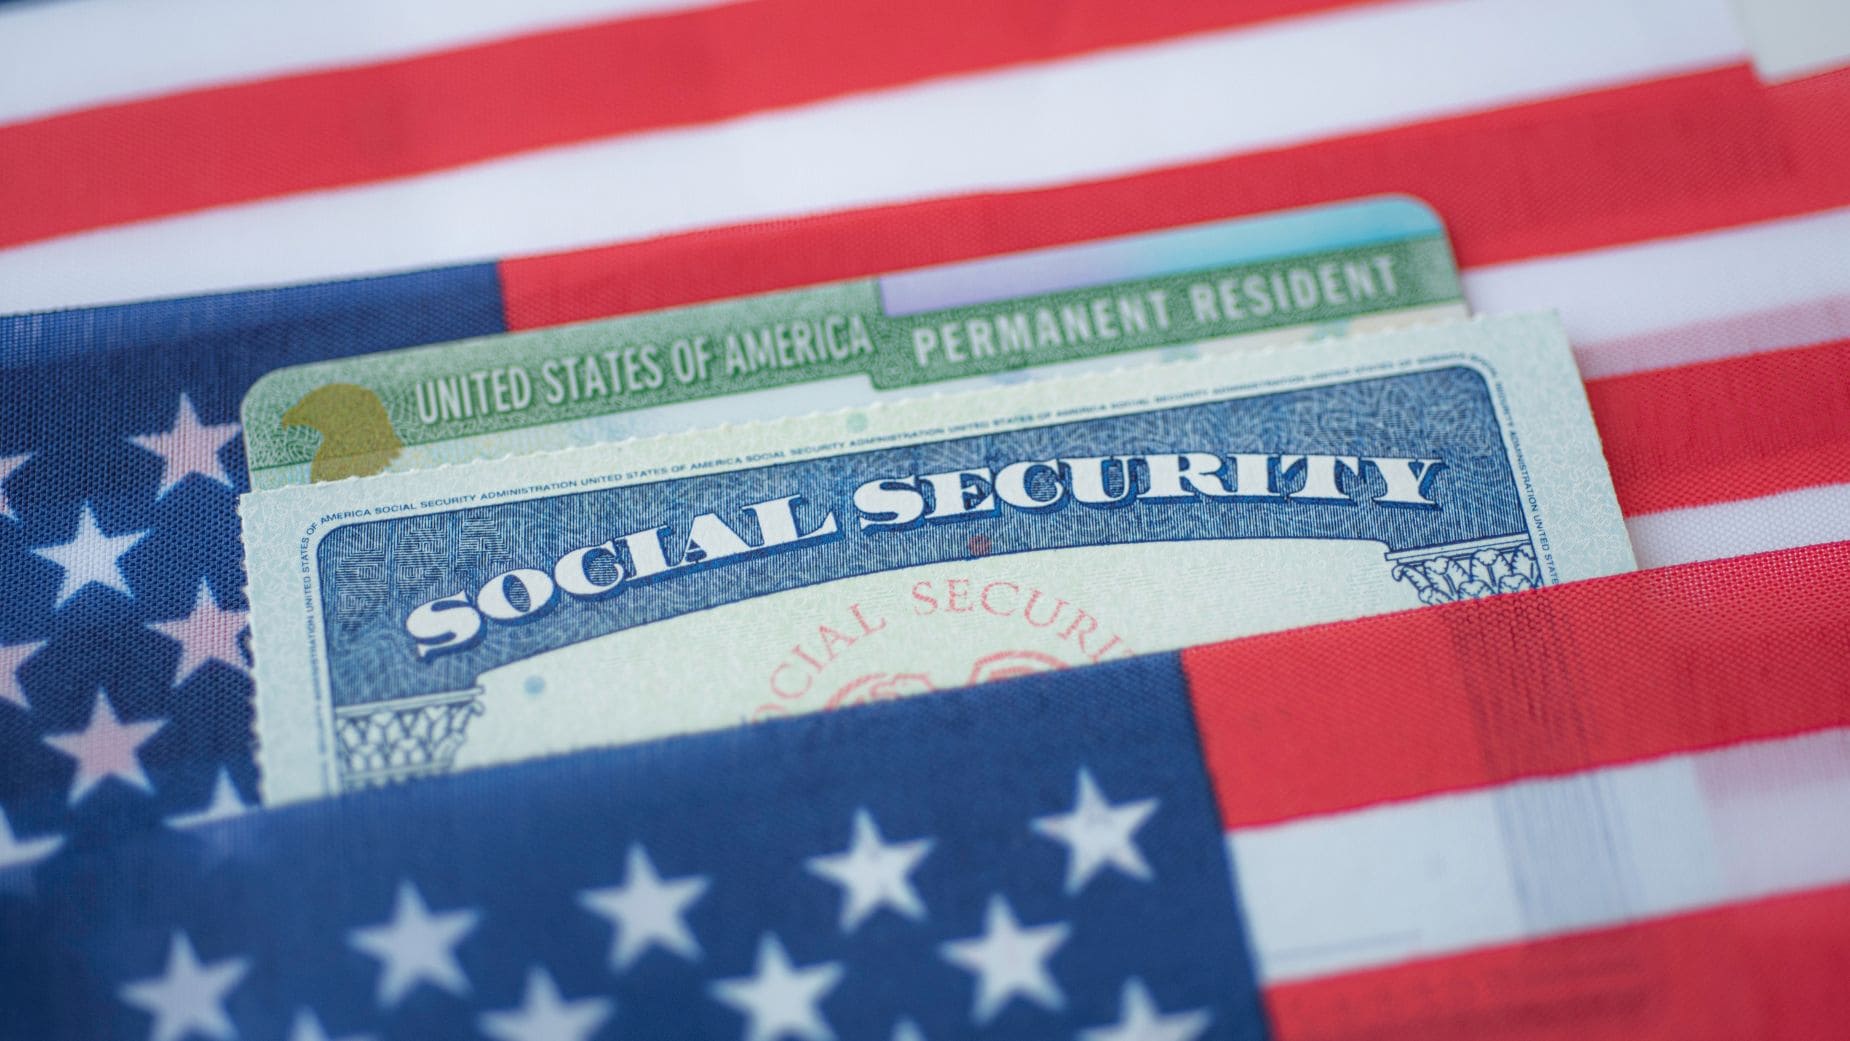 Americans in the group 1 are getting the new Social Security check